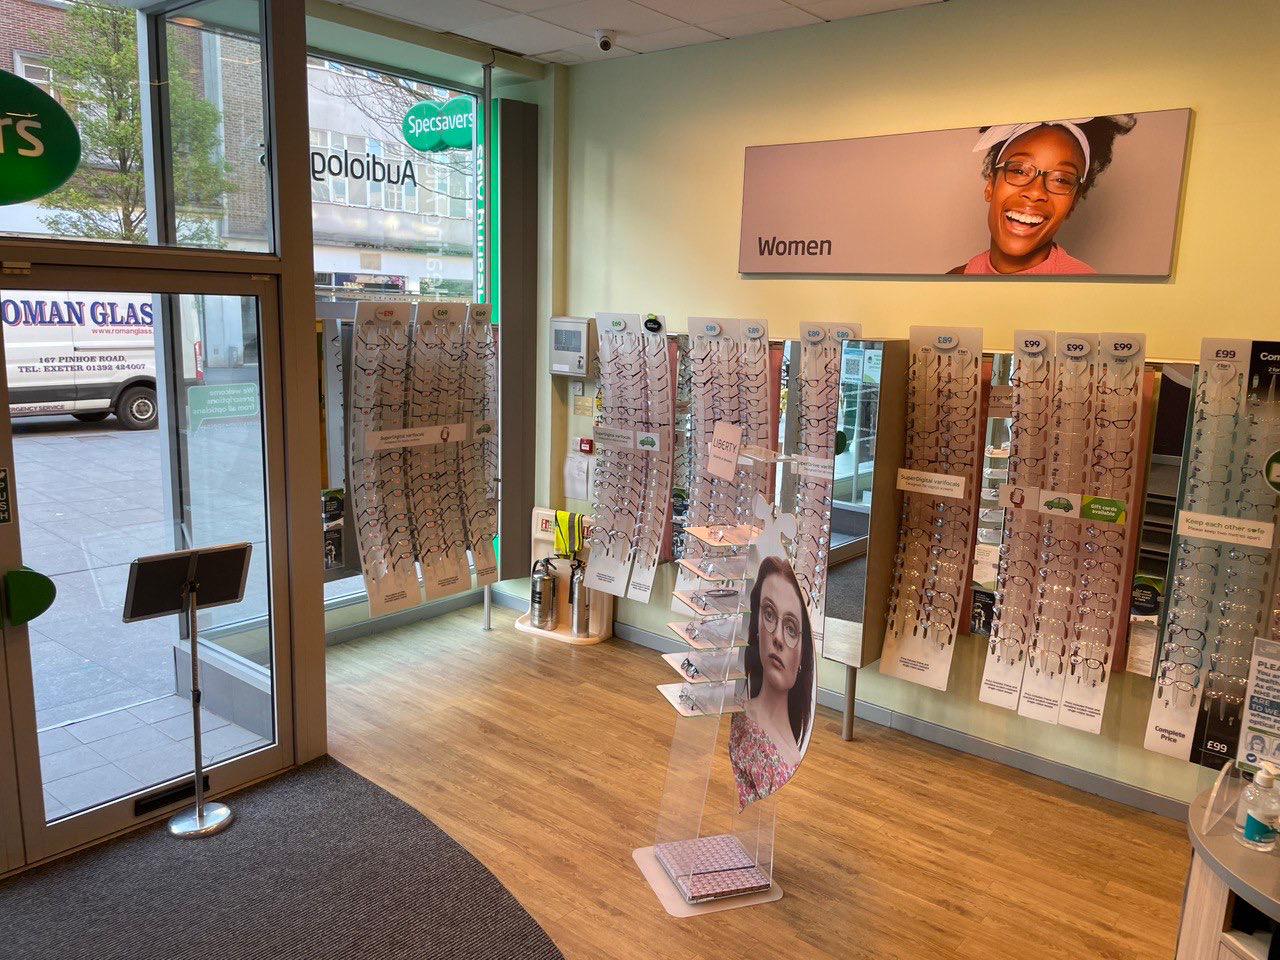 Exeter Specsavers Specsavers Opticians and Audiologists - Exeter Exeter 01392 210604